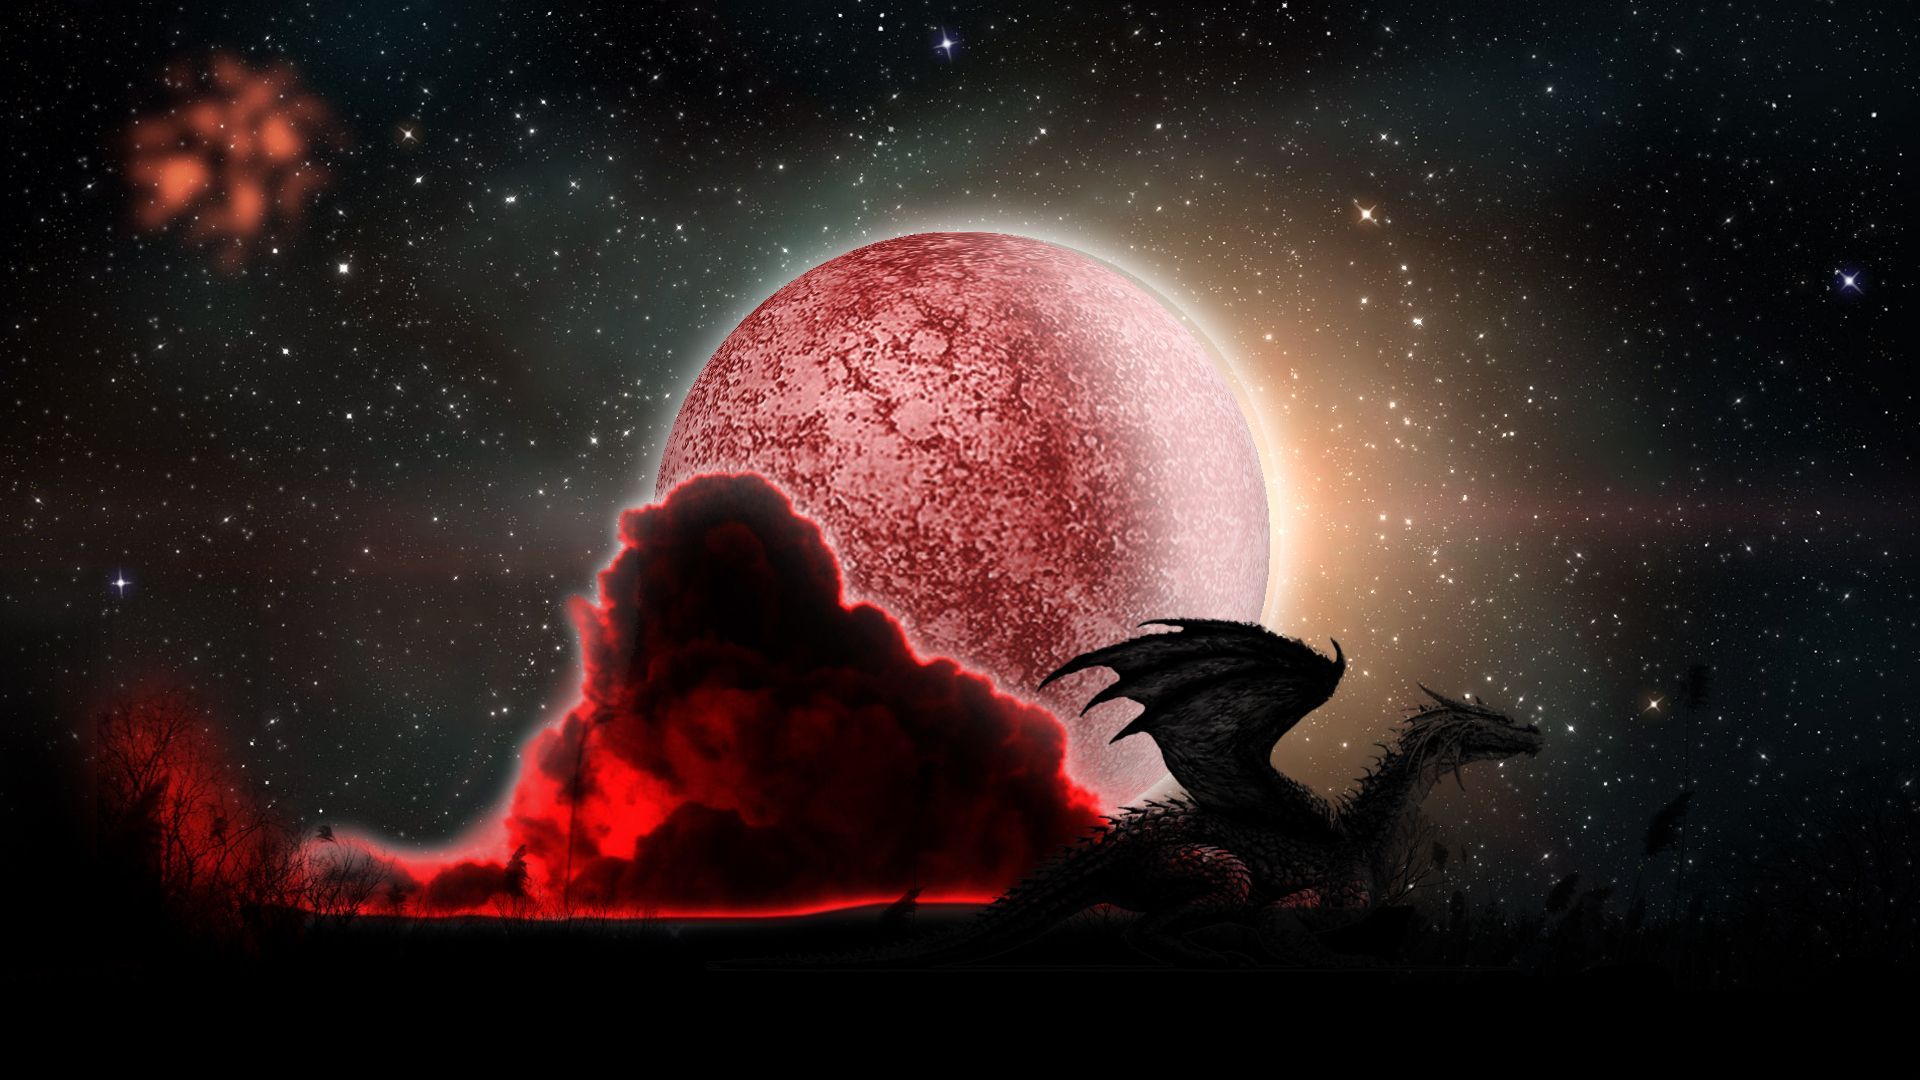 Halloween Dark Night Red Moon Phone Wallpaper Template and Ideas for Design   Fotor